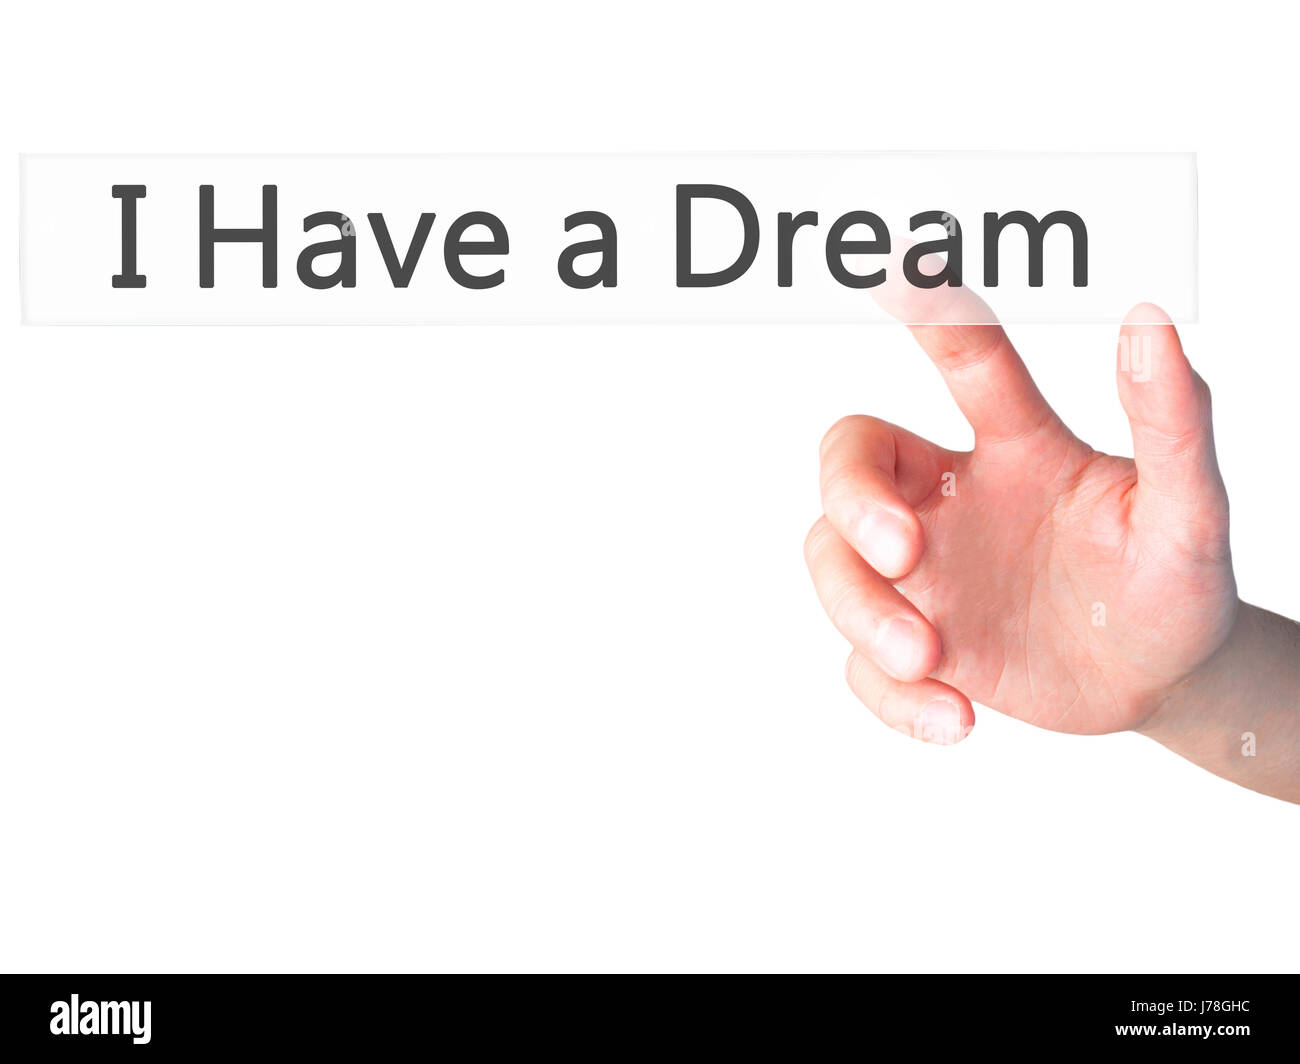 I Have a Dream - Hand pressing a button on blurred background concept . Business, technology, internet concept. Stock Photo Stock Photo